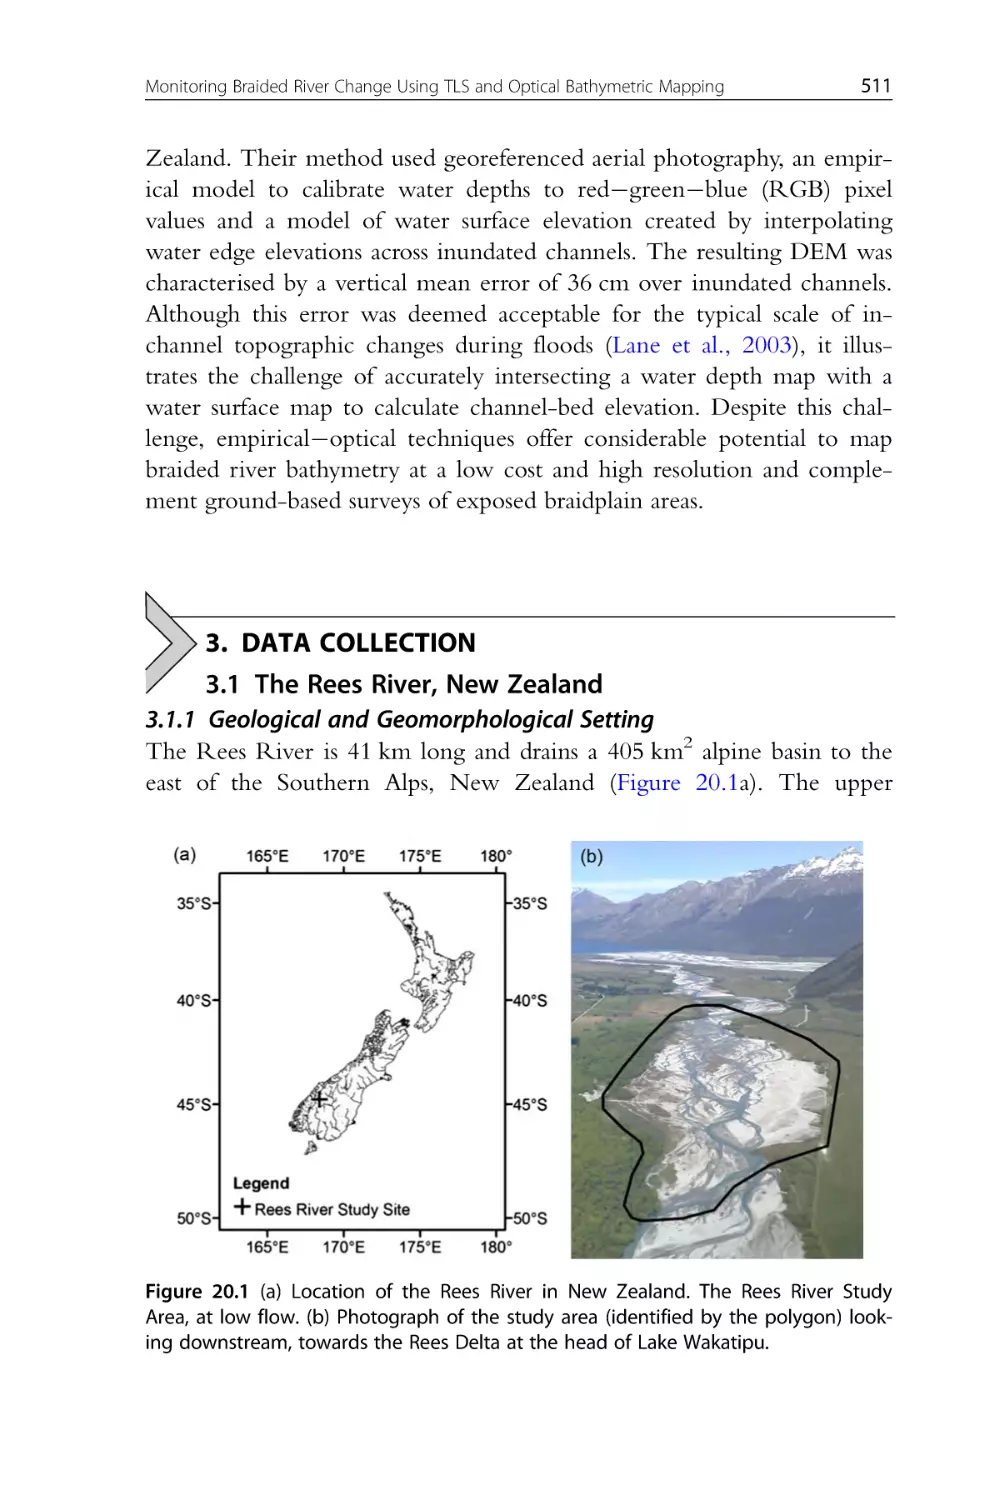 3. Data Collection
3.1 The Rees River, New Zealand
3.1.1 Geological and Geomorphological Setting